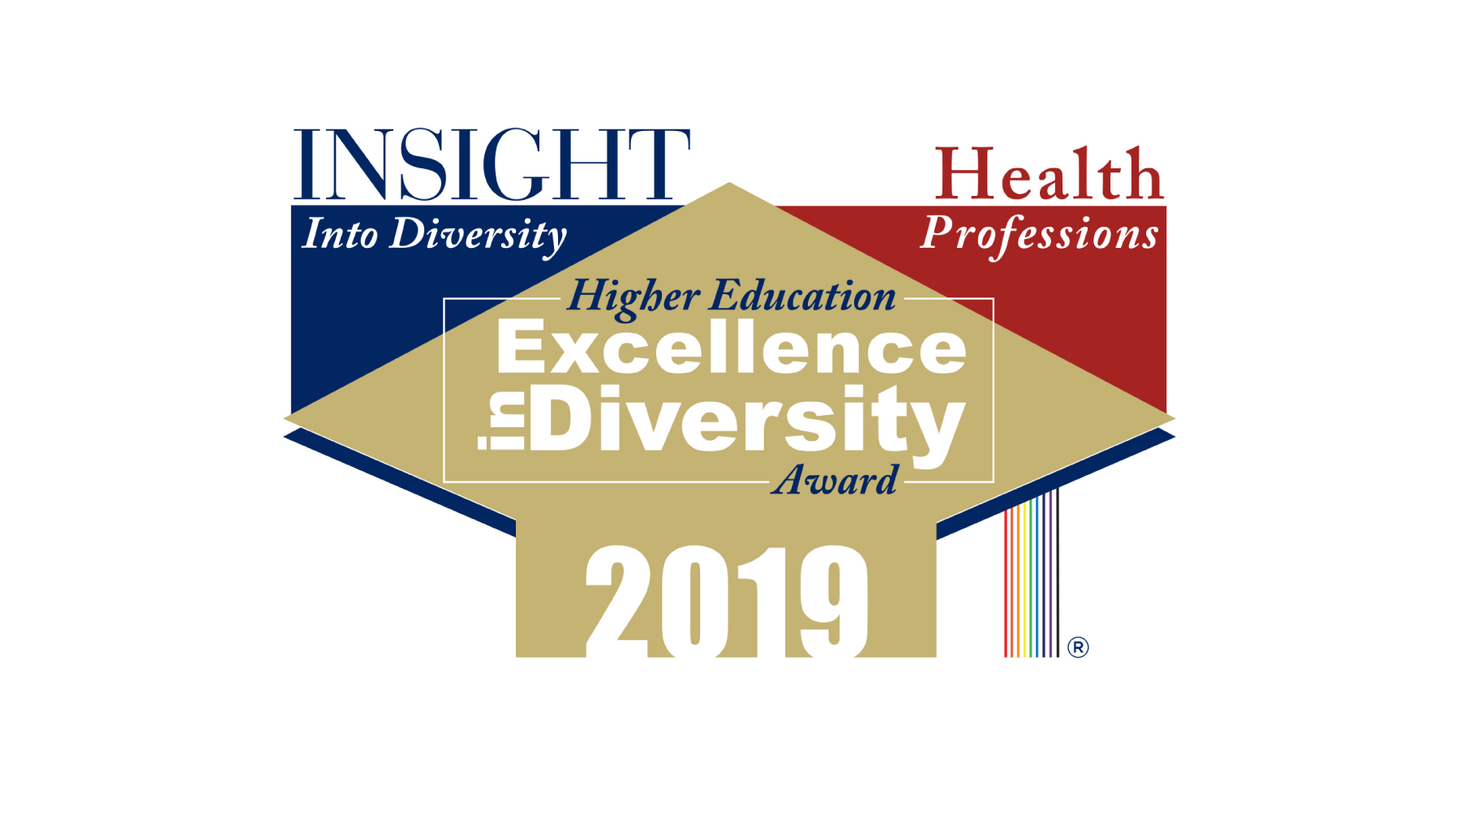 Insight Into Diversity 2019 Health Professions Higher Education Excellence in Diversity (HEED) Award logo